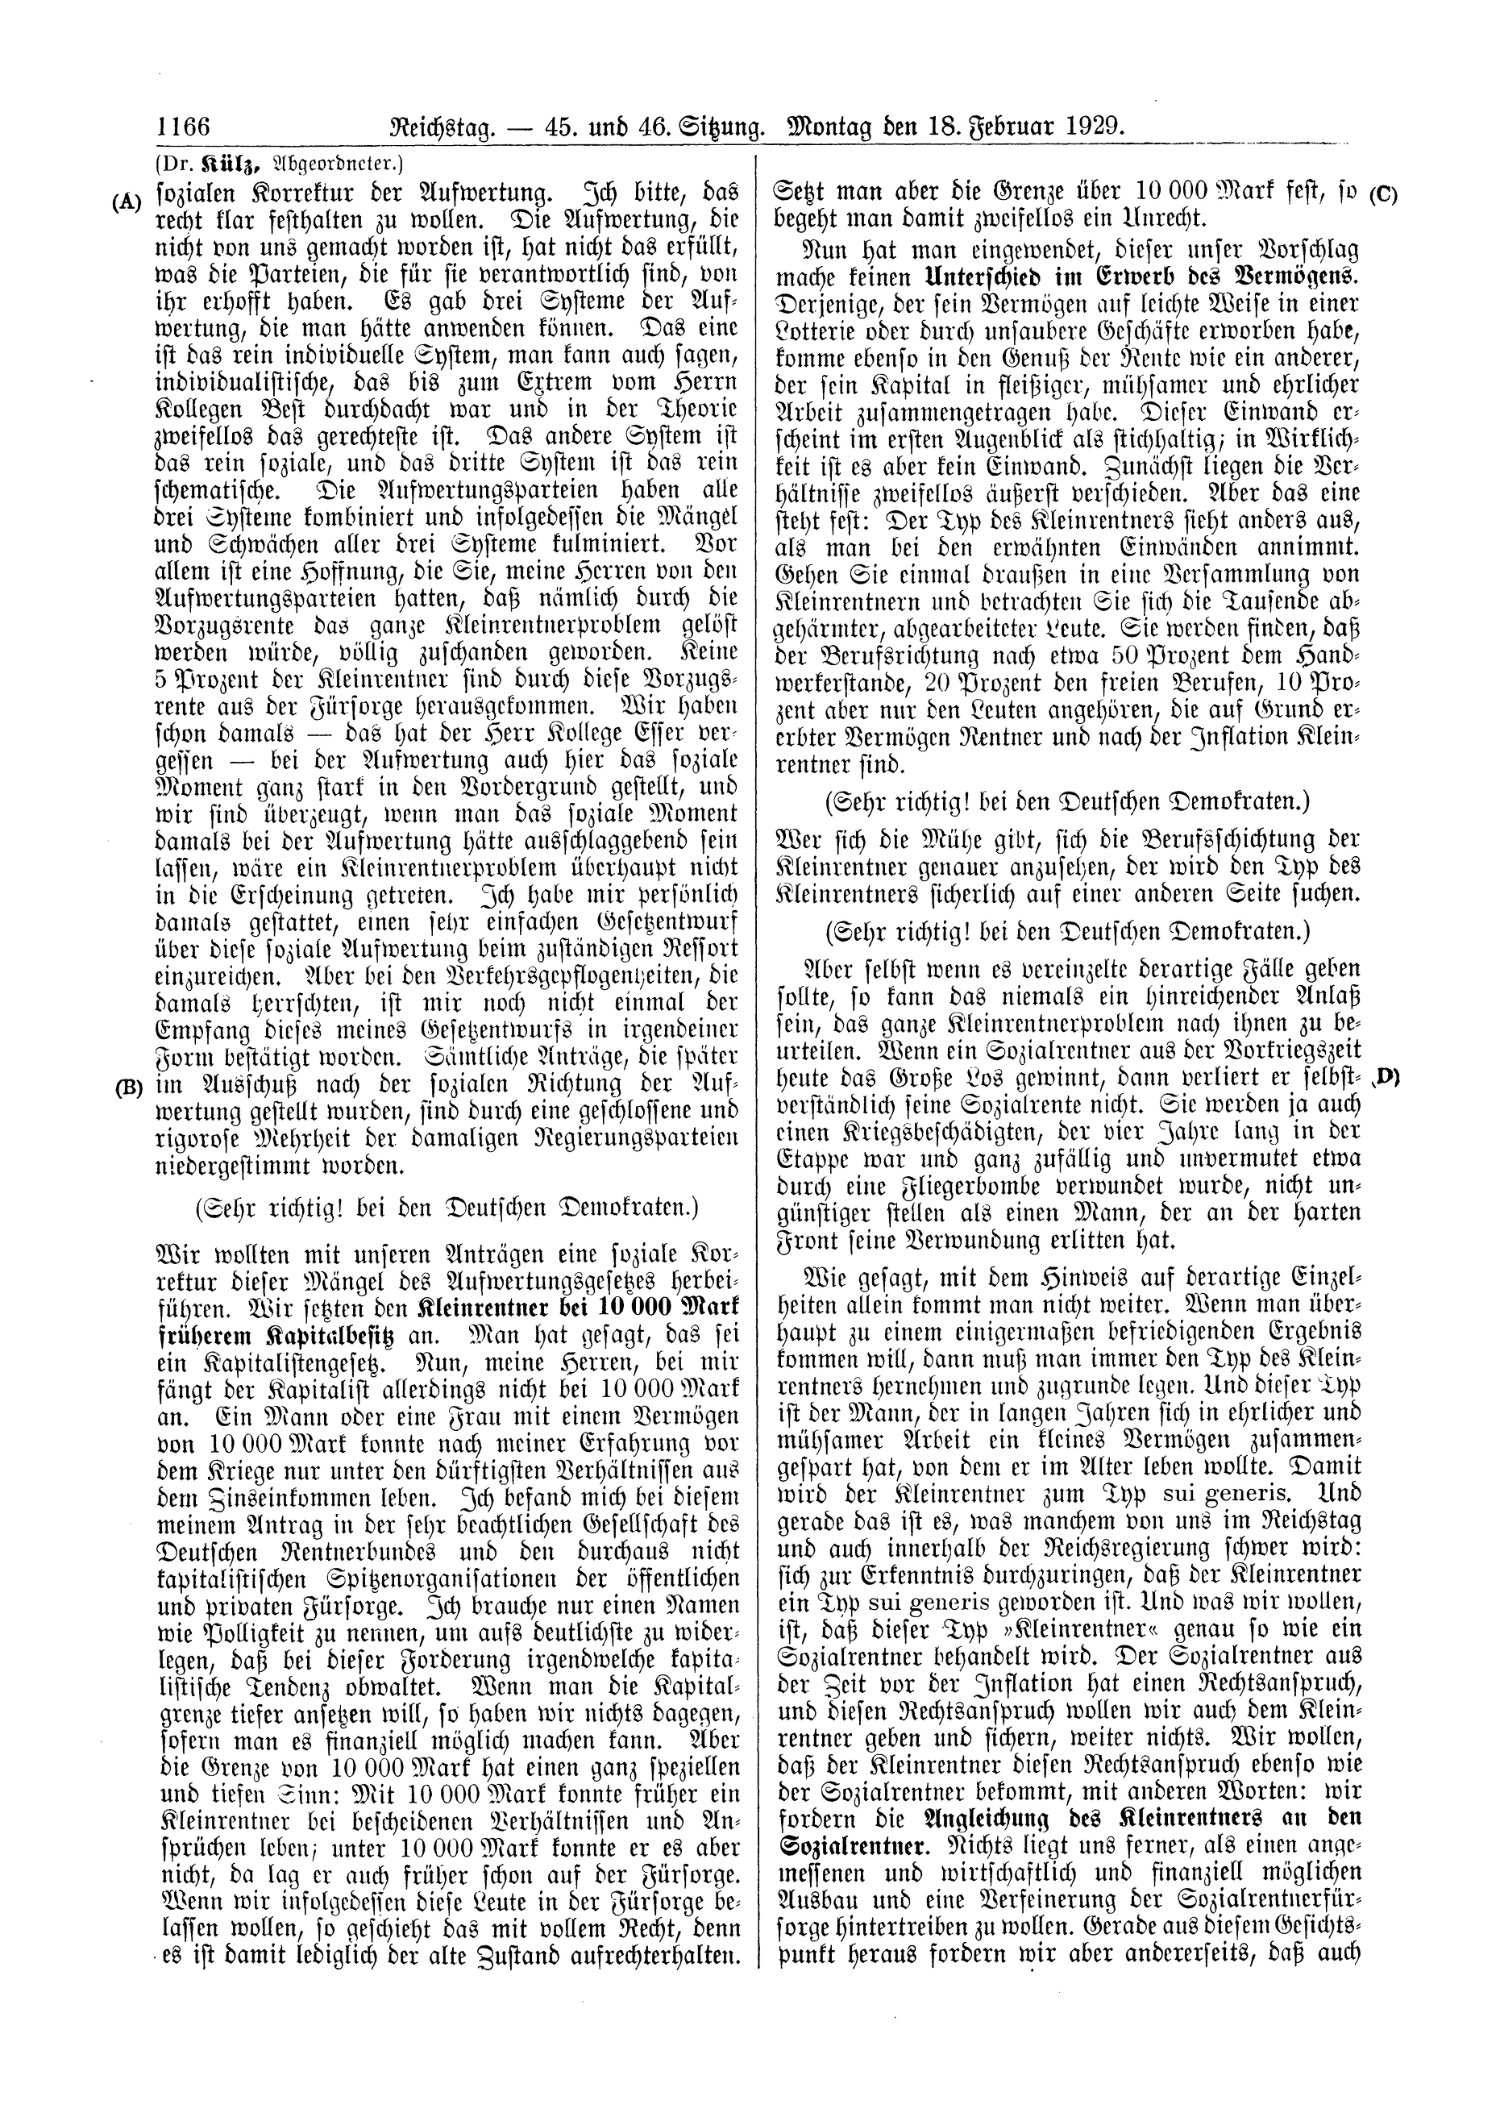 Scan of page 1166